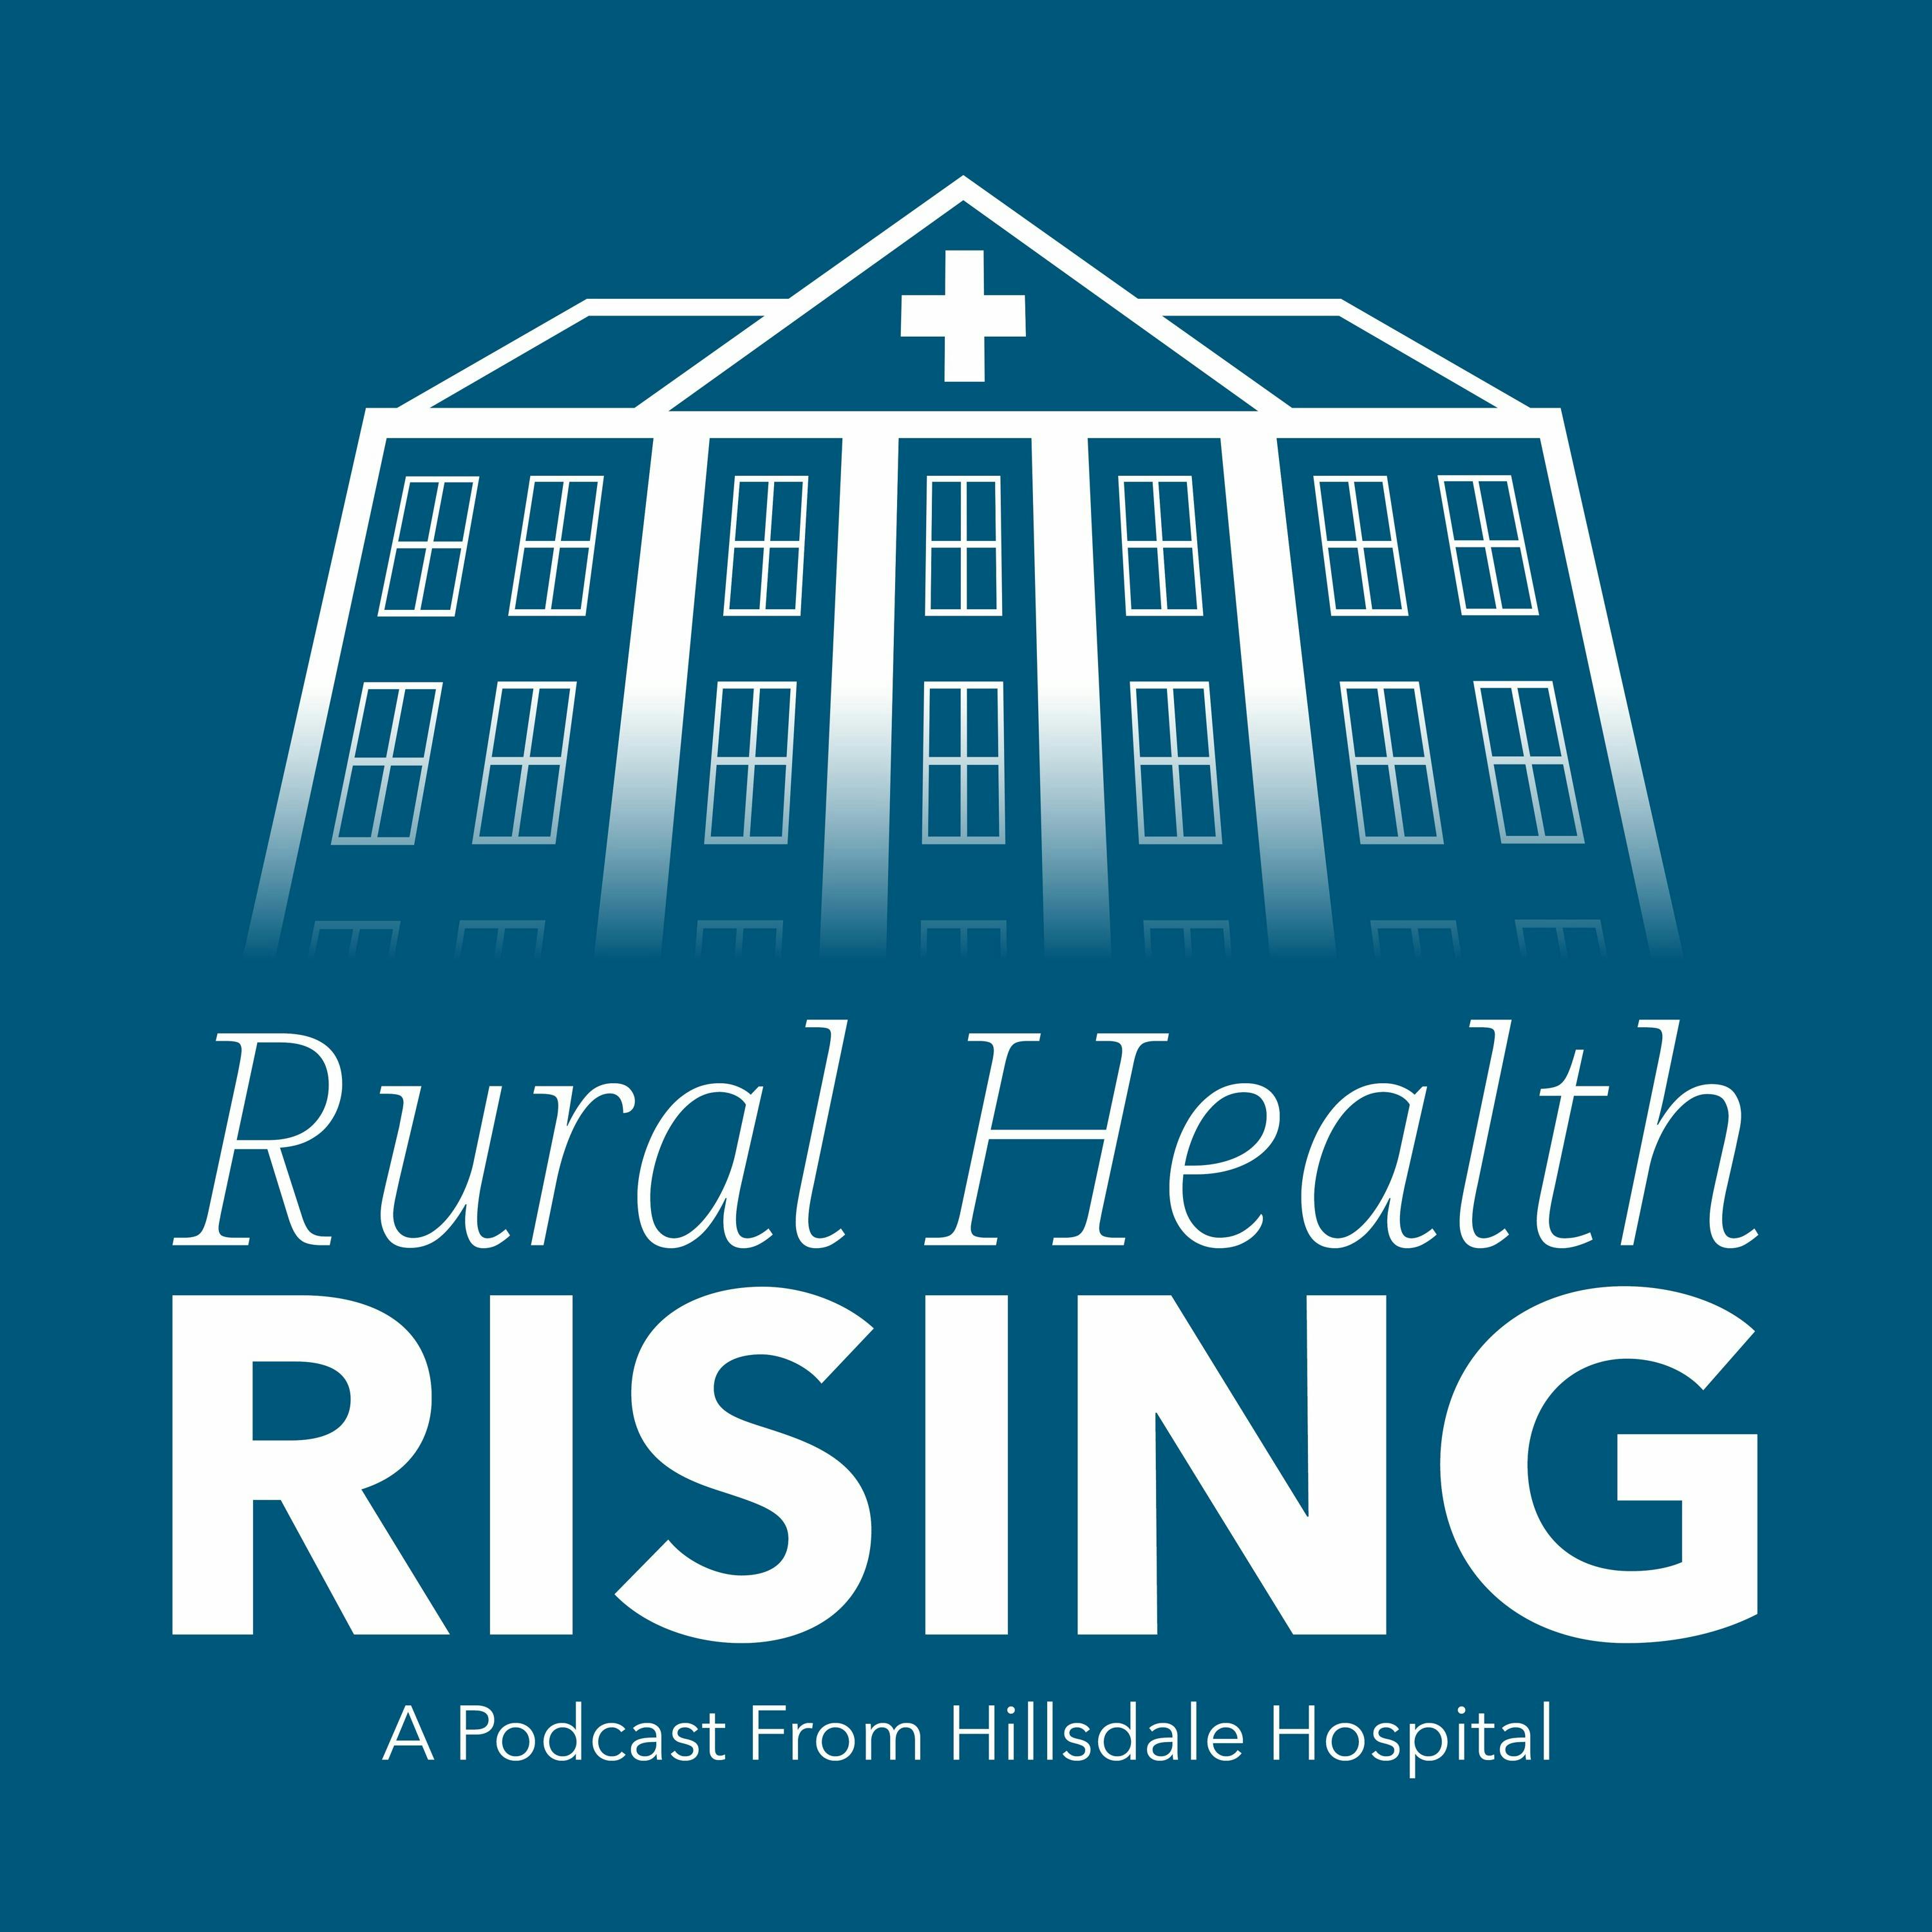 Episode 20: Healthcare Policy